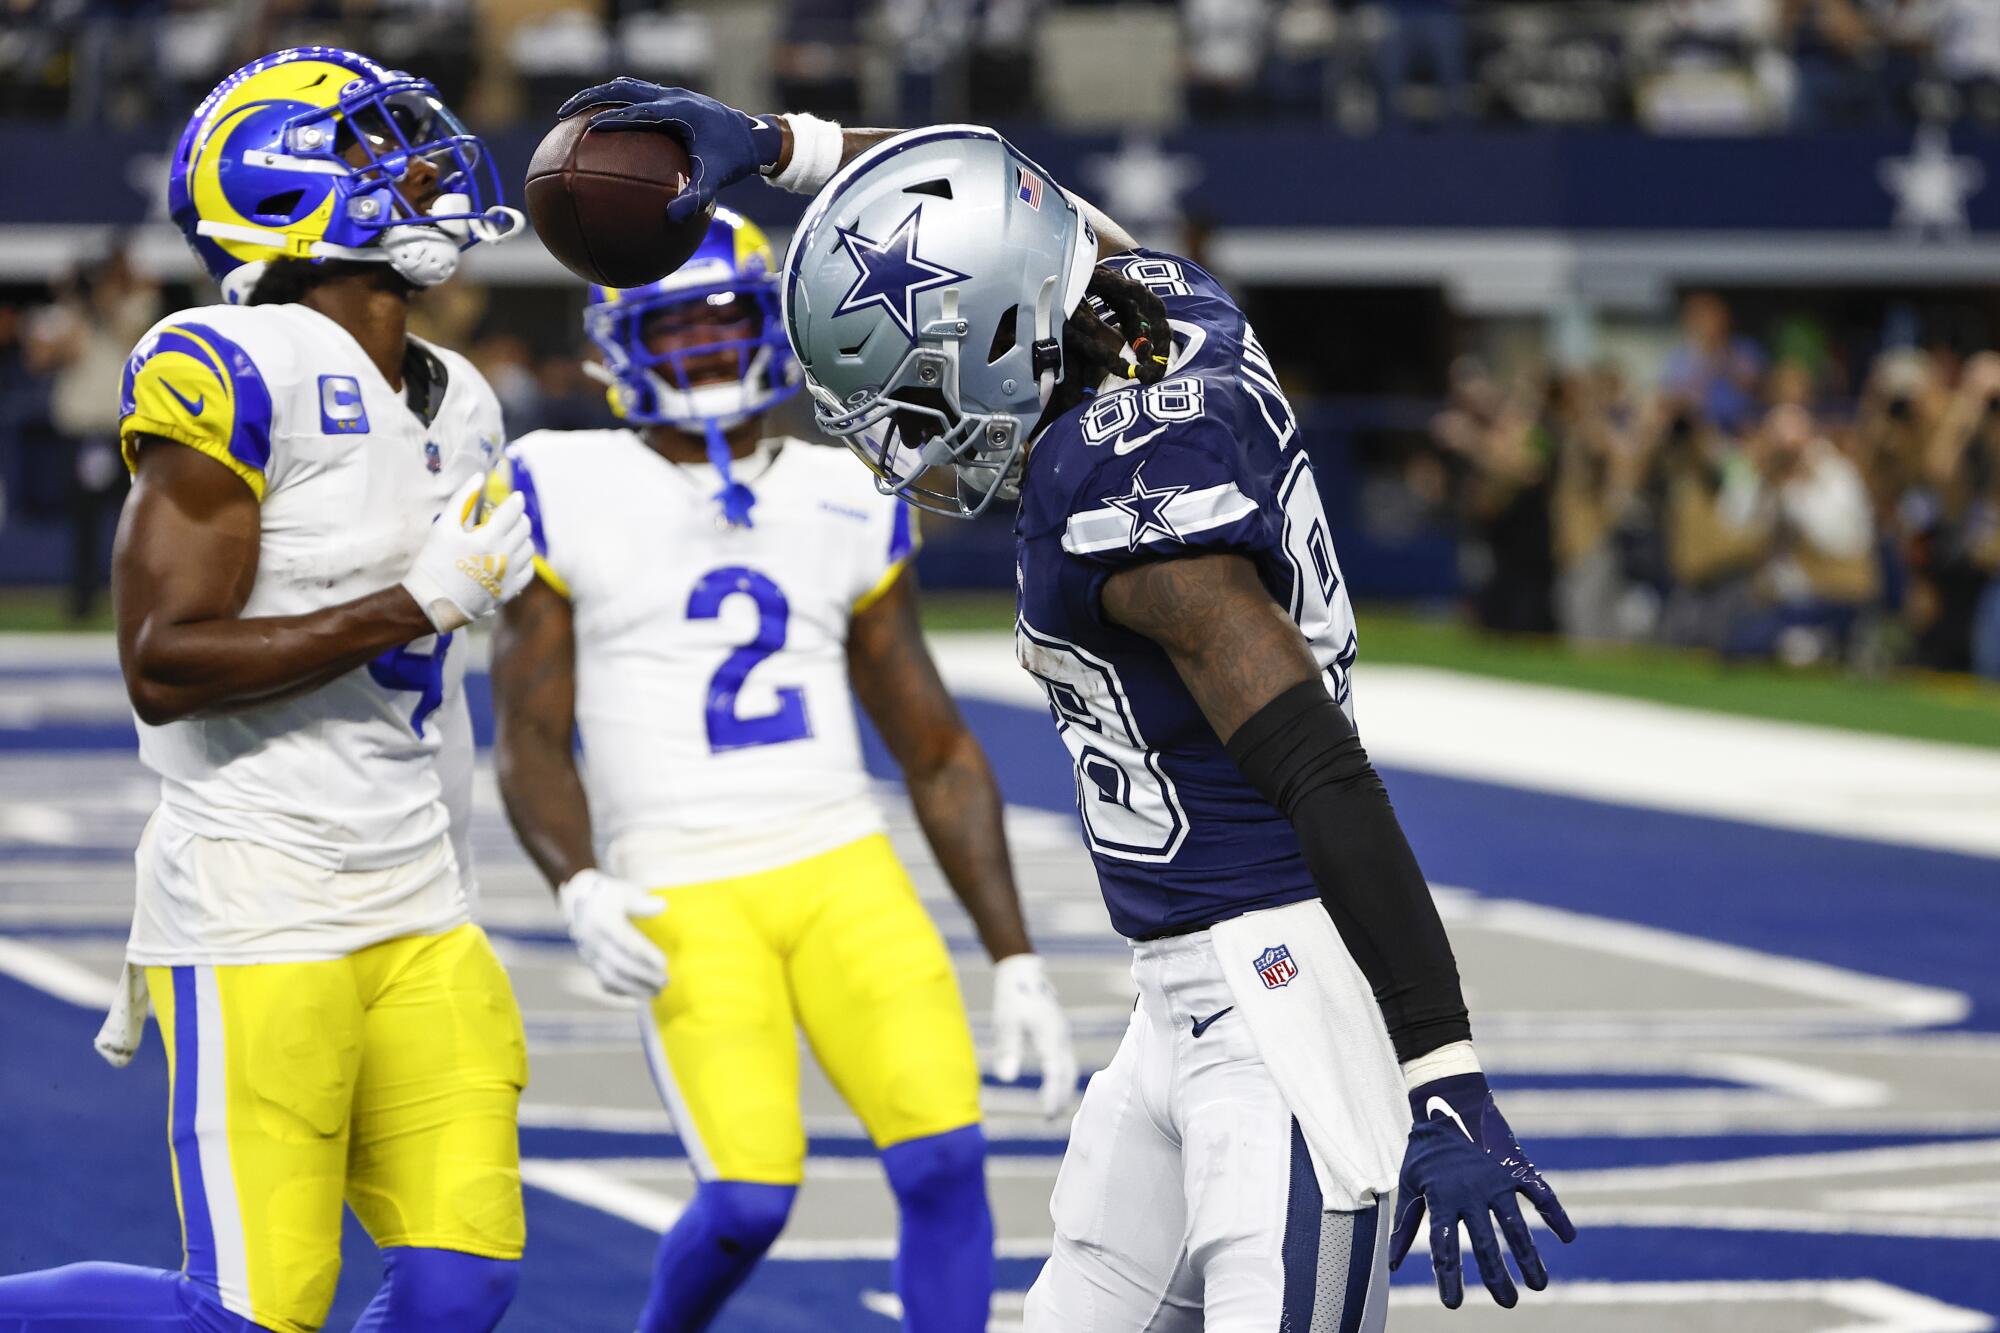 Dallas Cowboys wide receiver CeeDee Lamb celebrates after scoring a touchdown against the Rams at AT&T Stadium.